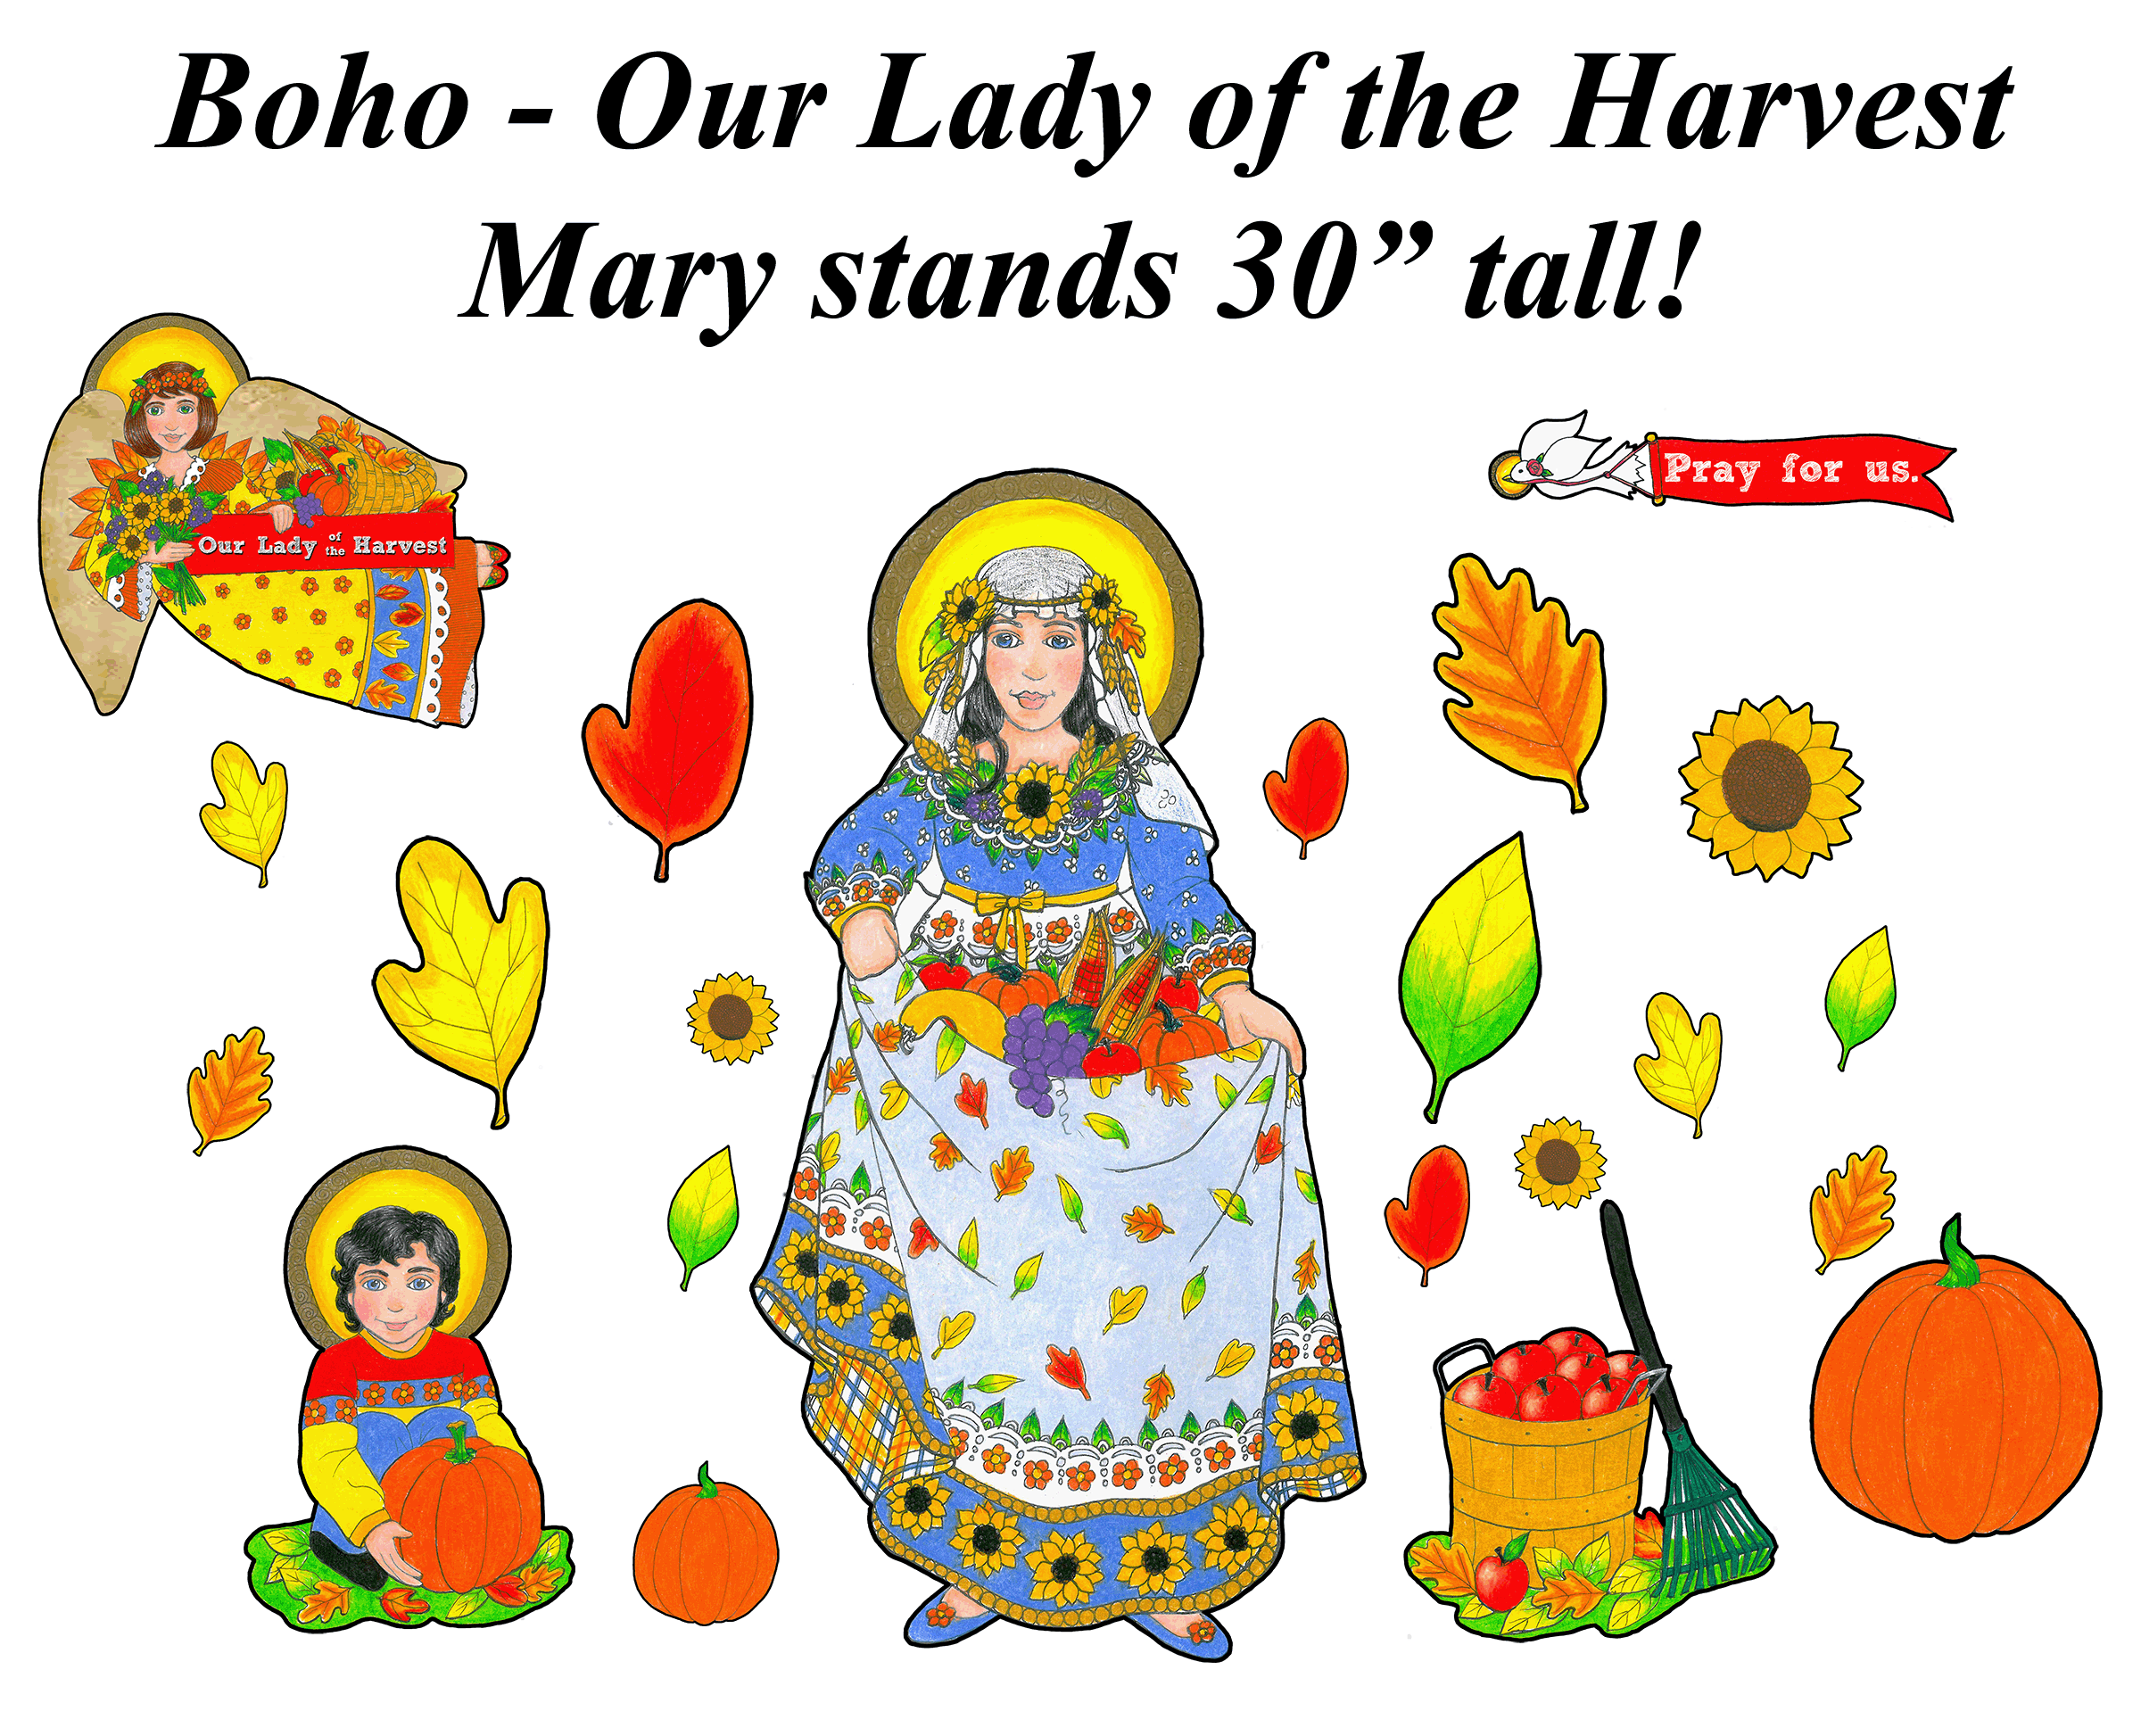 Boho - Our Lady of the Harvest